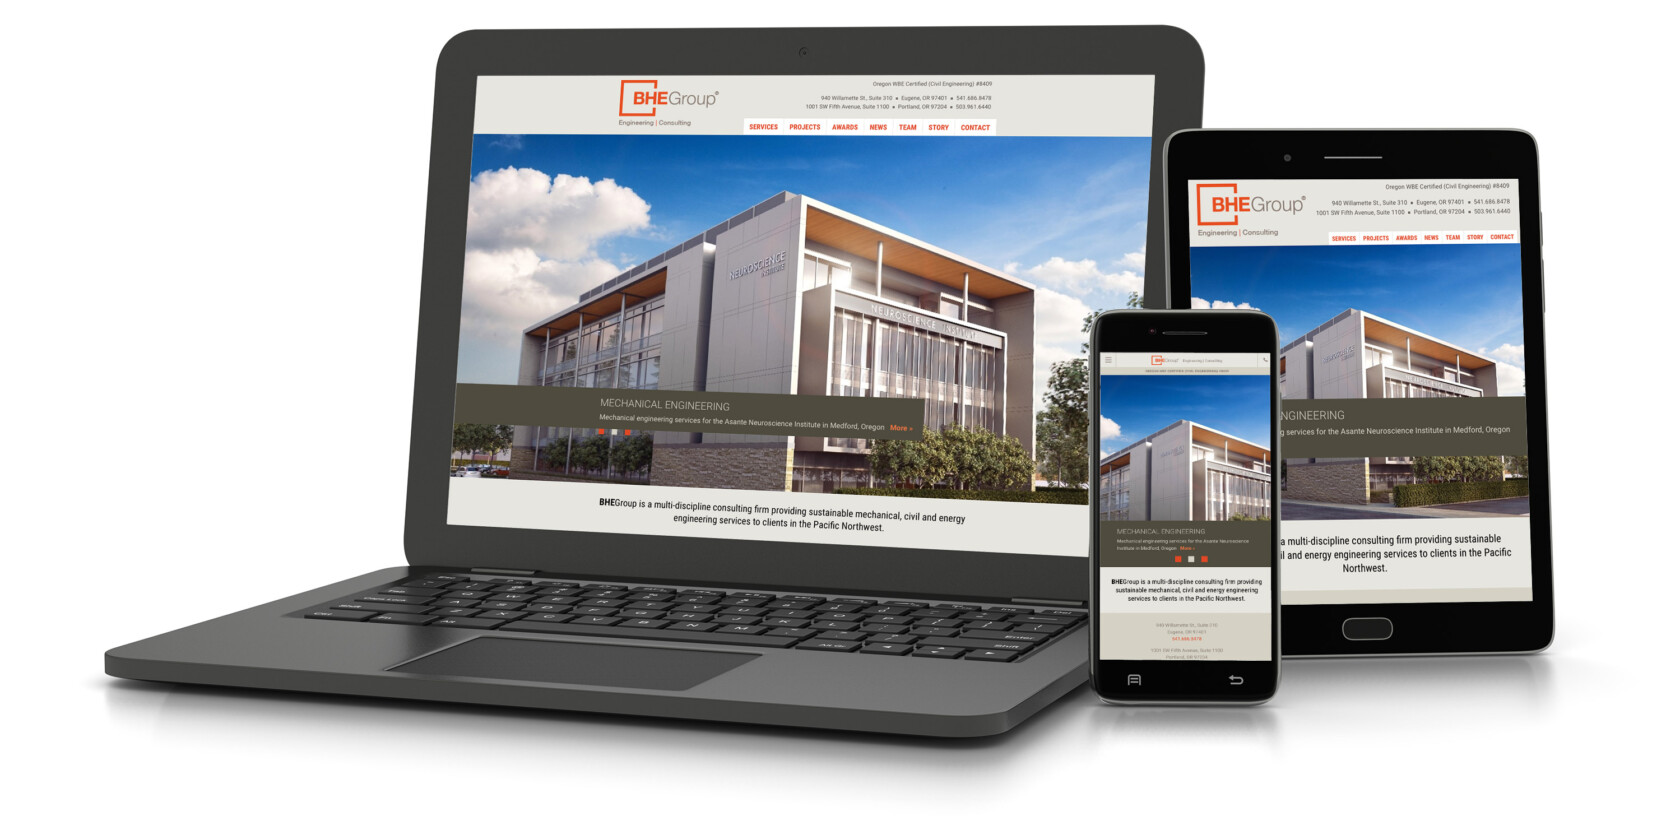 BHE Group website redesigned to be responsive across multiple devices